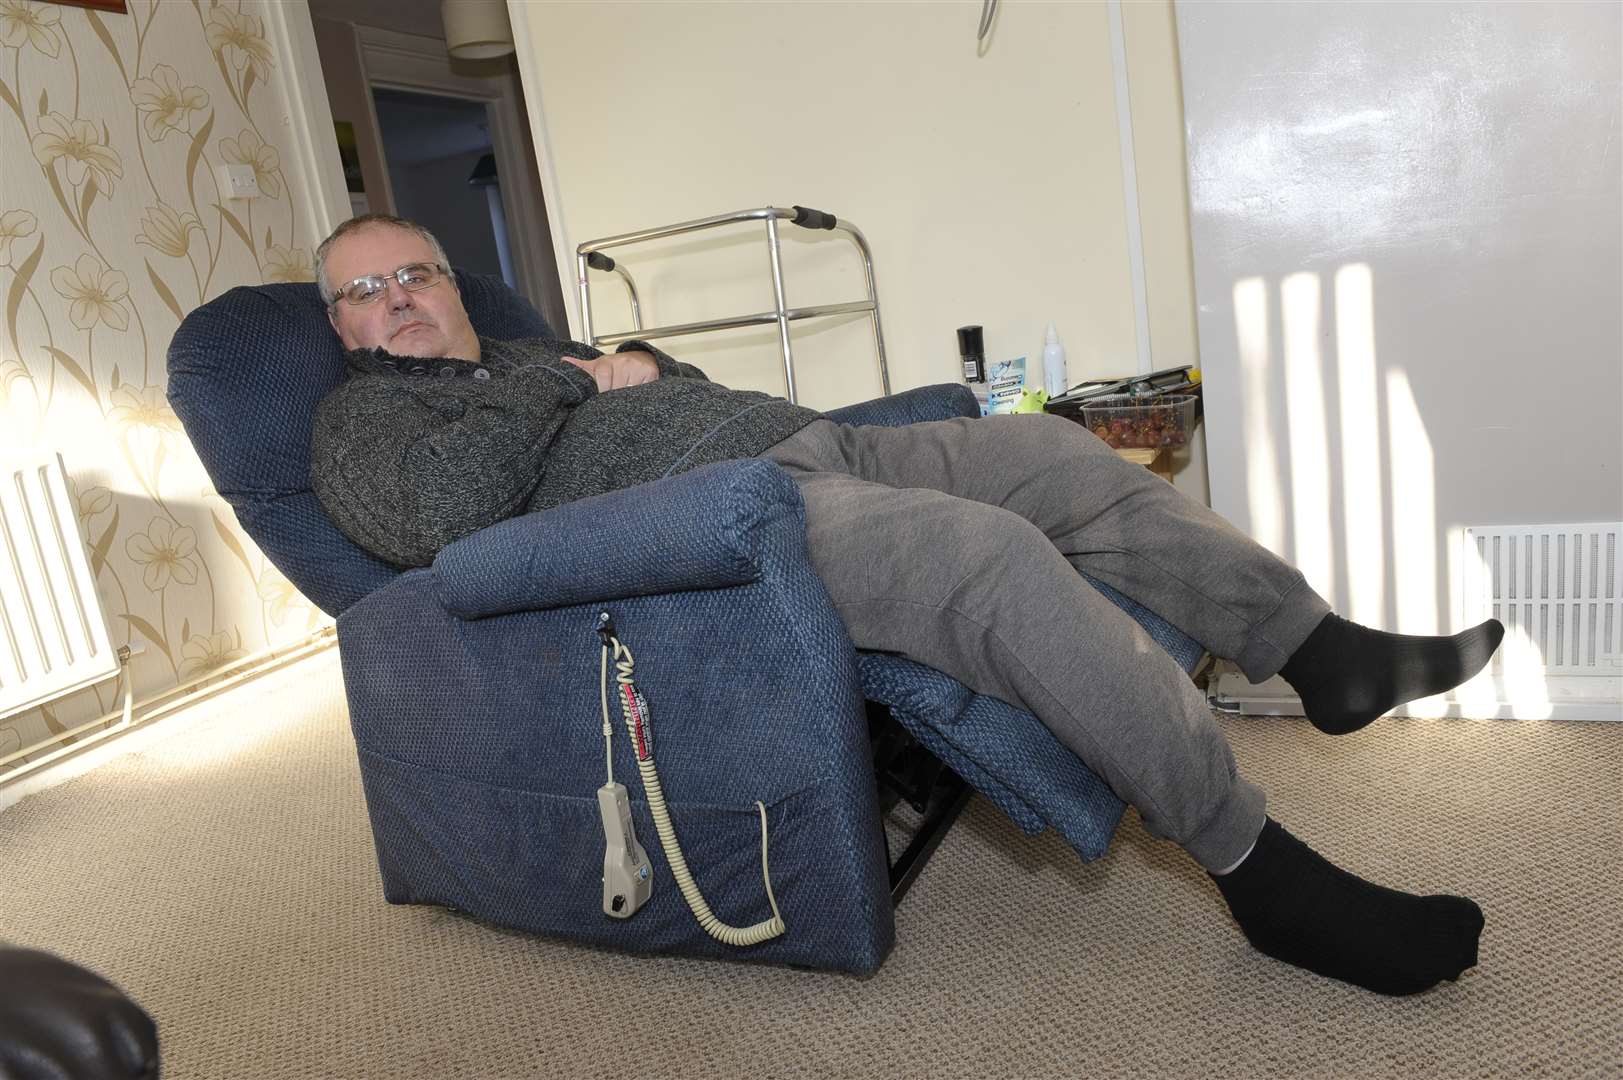 The chair is rise and recline, which helps Mr Freer get in and out of it